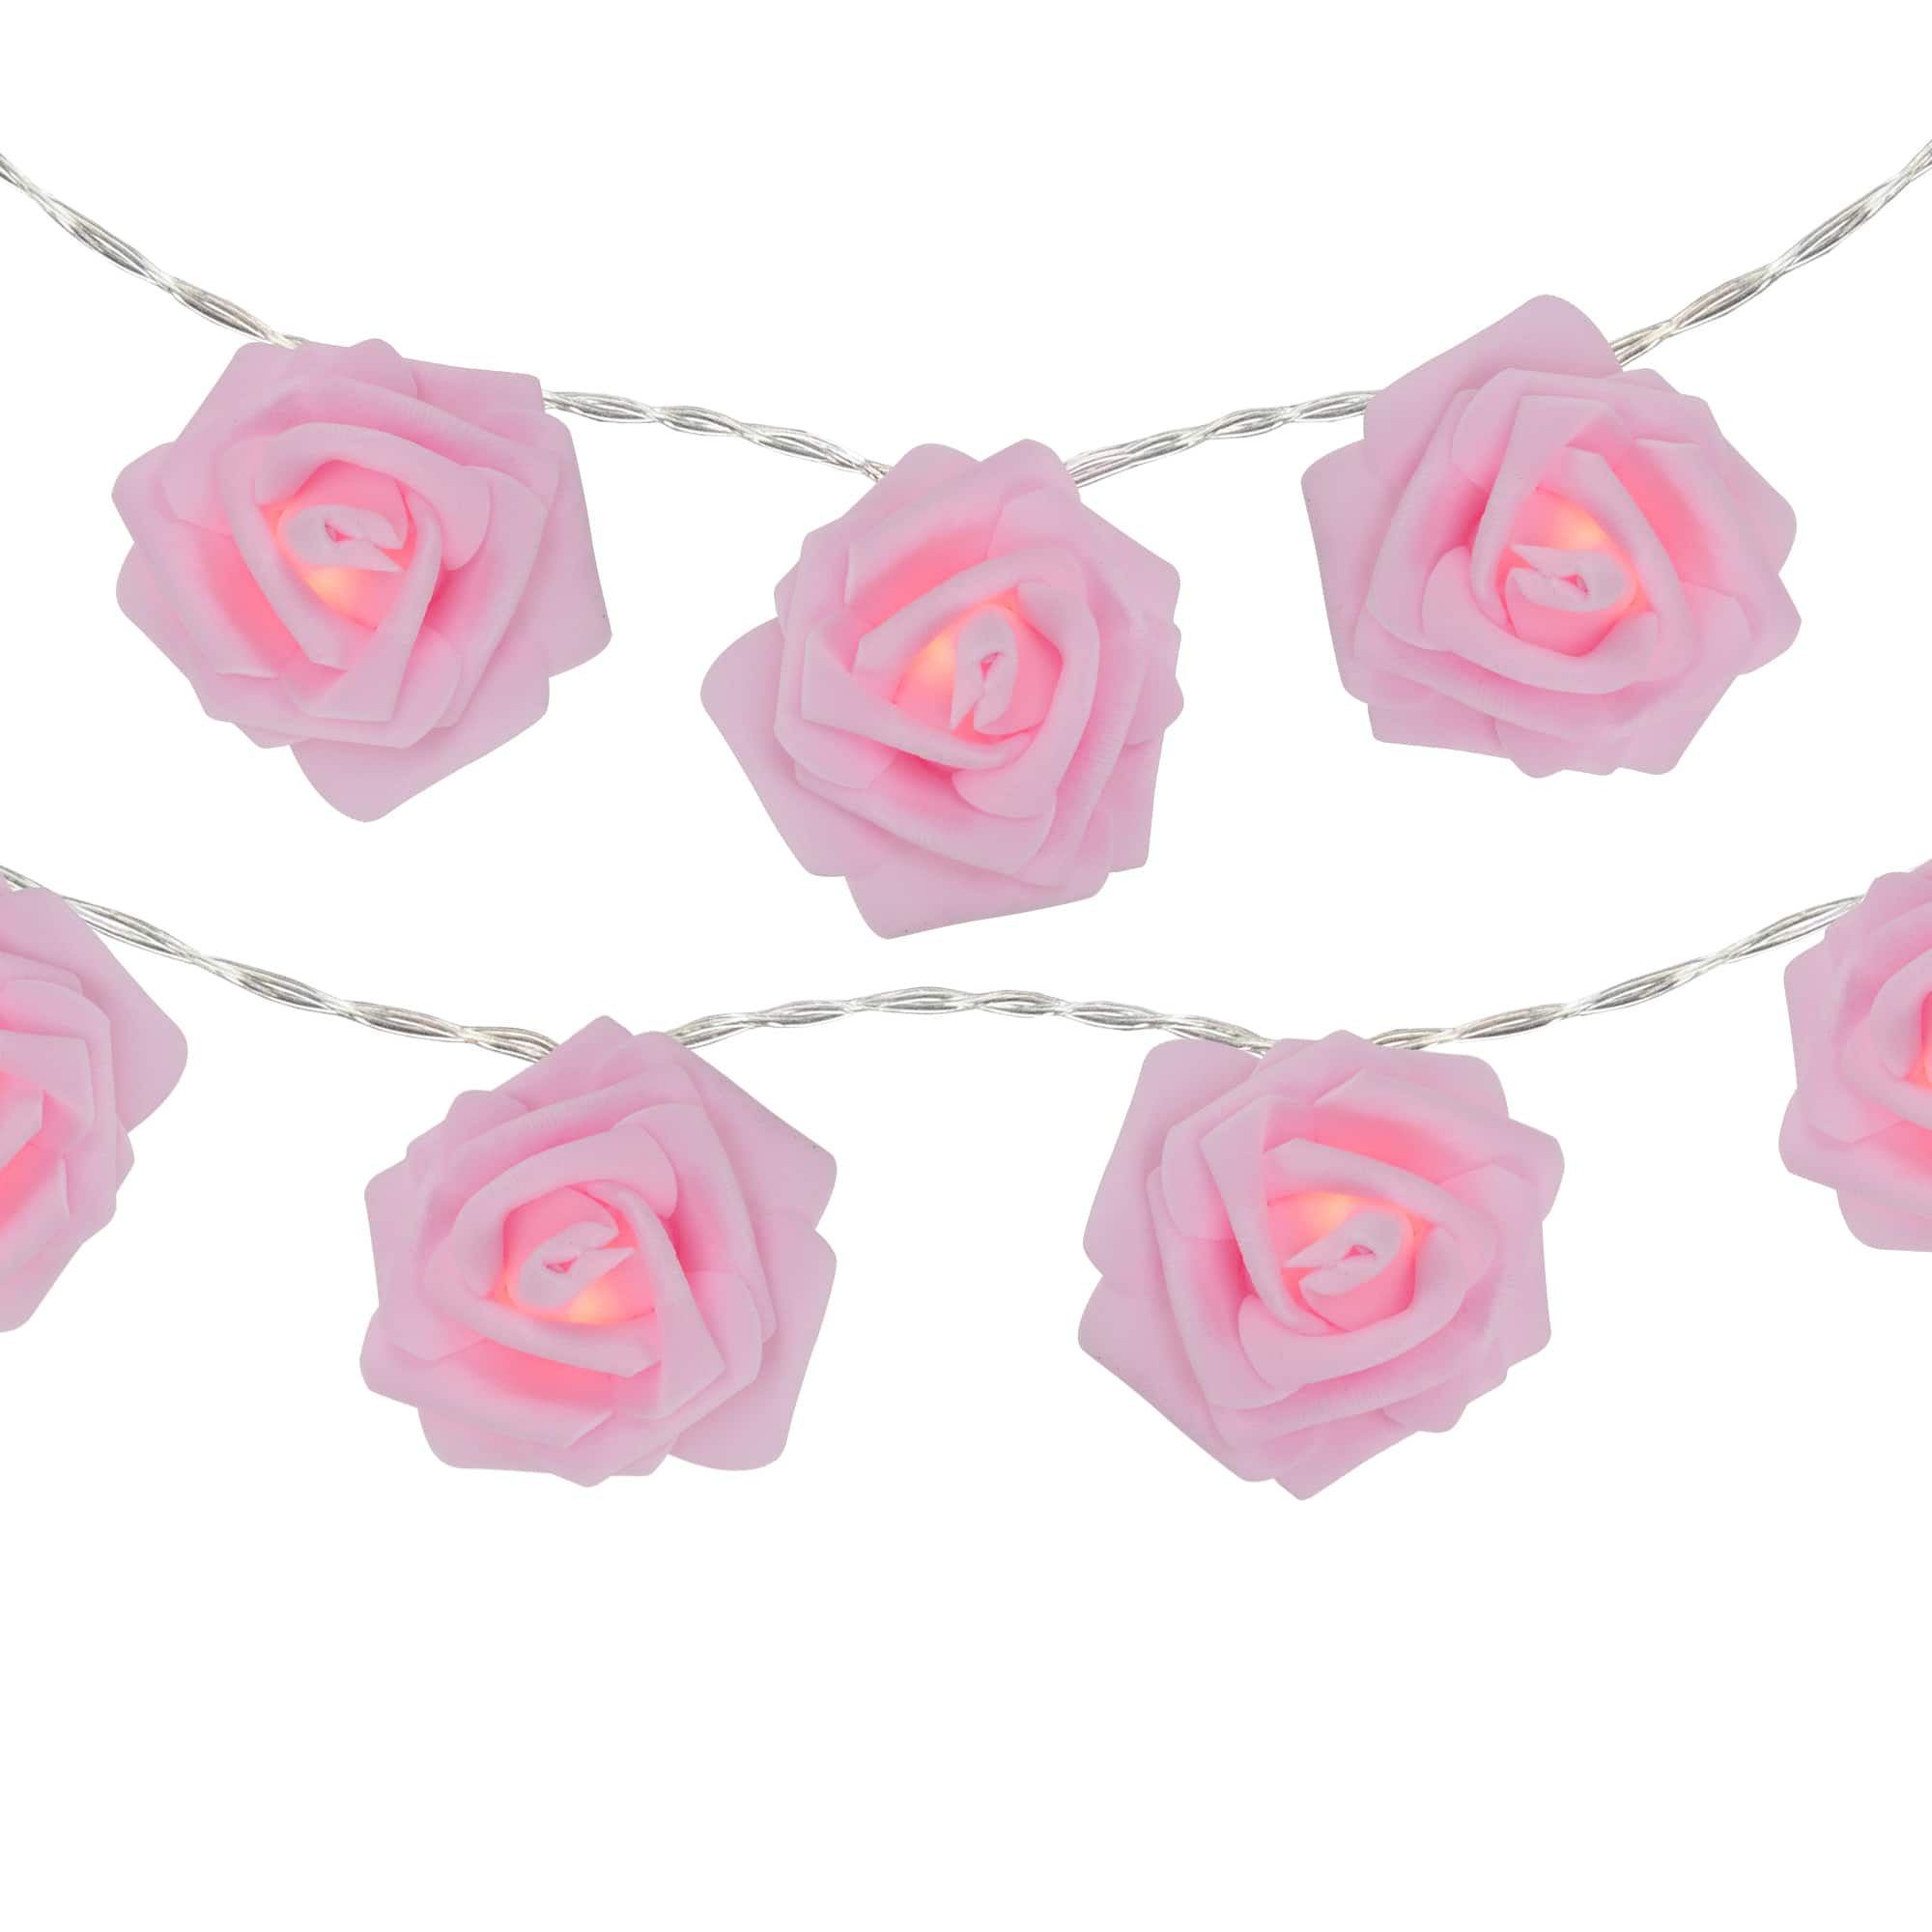 10ct. Pink Rose Flower LED String Lights with Clear Wire